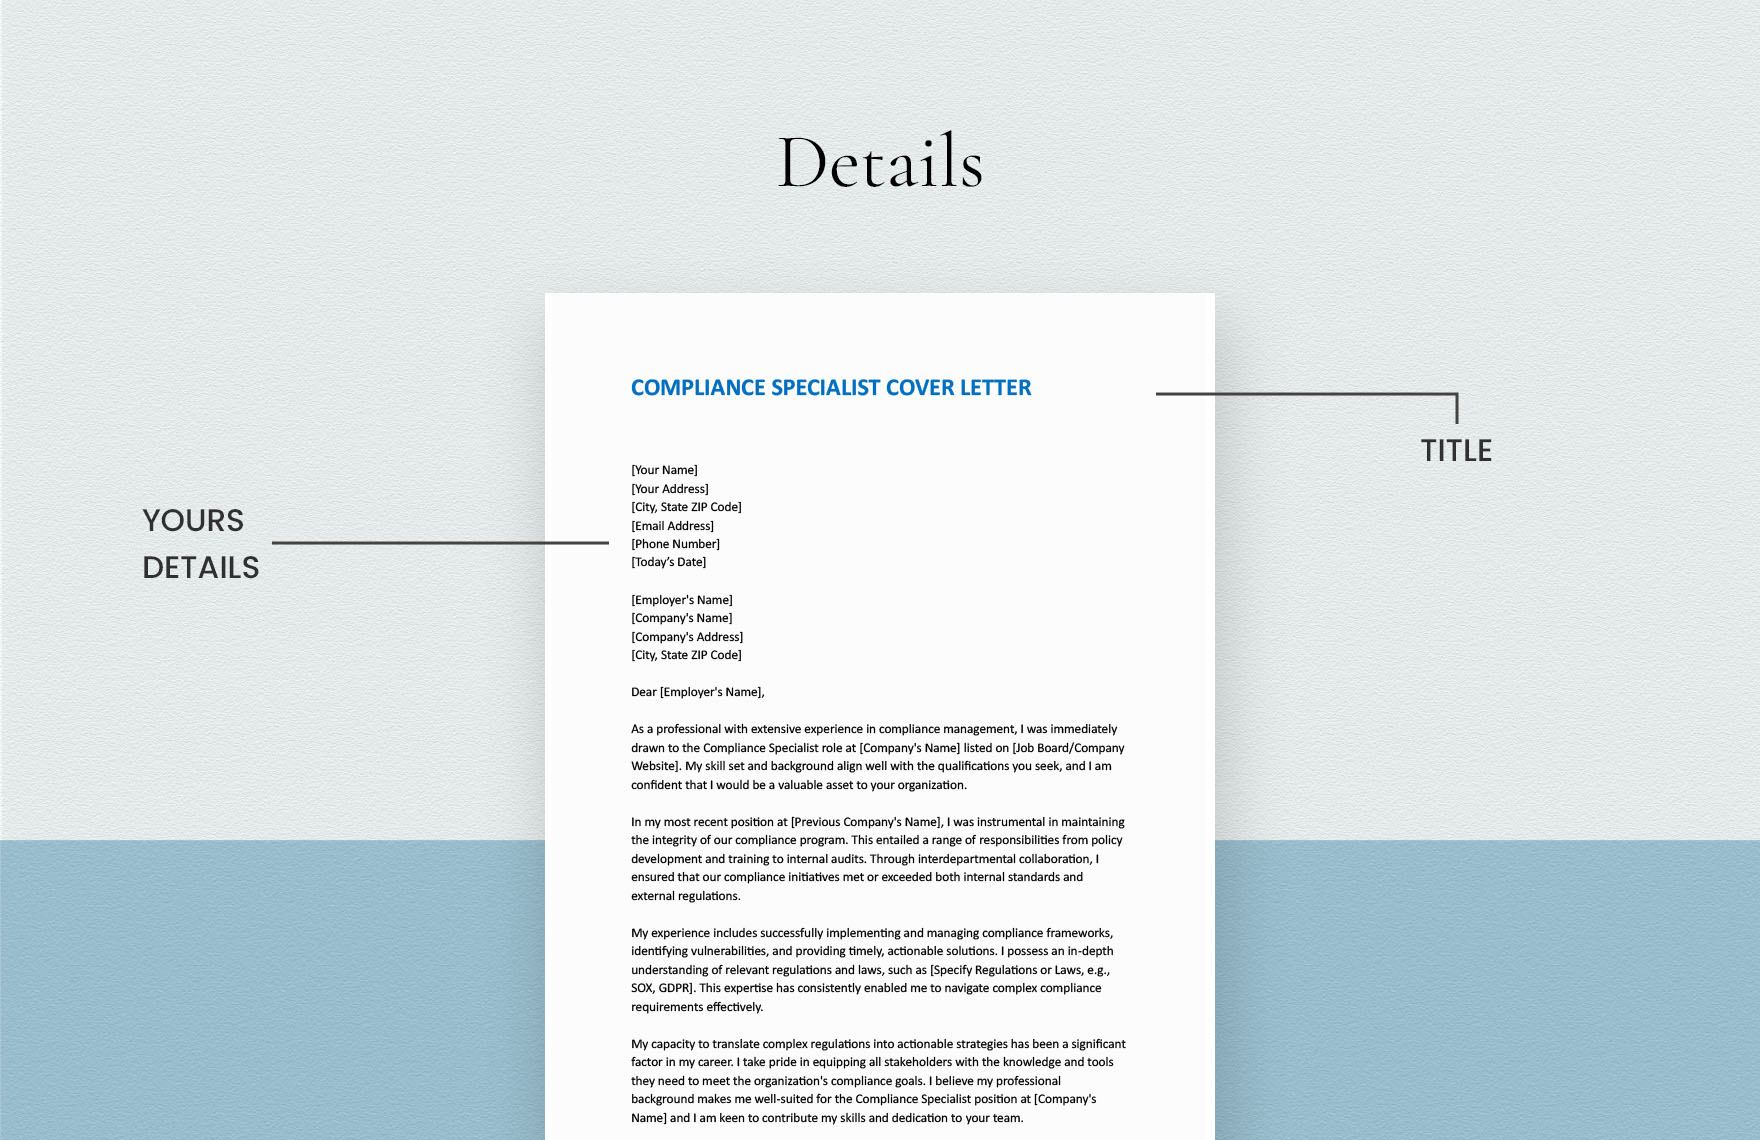 Compliance Specialist Cover Letter